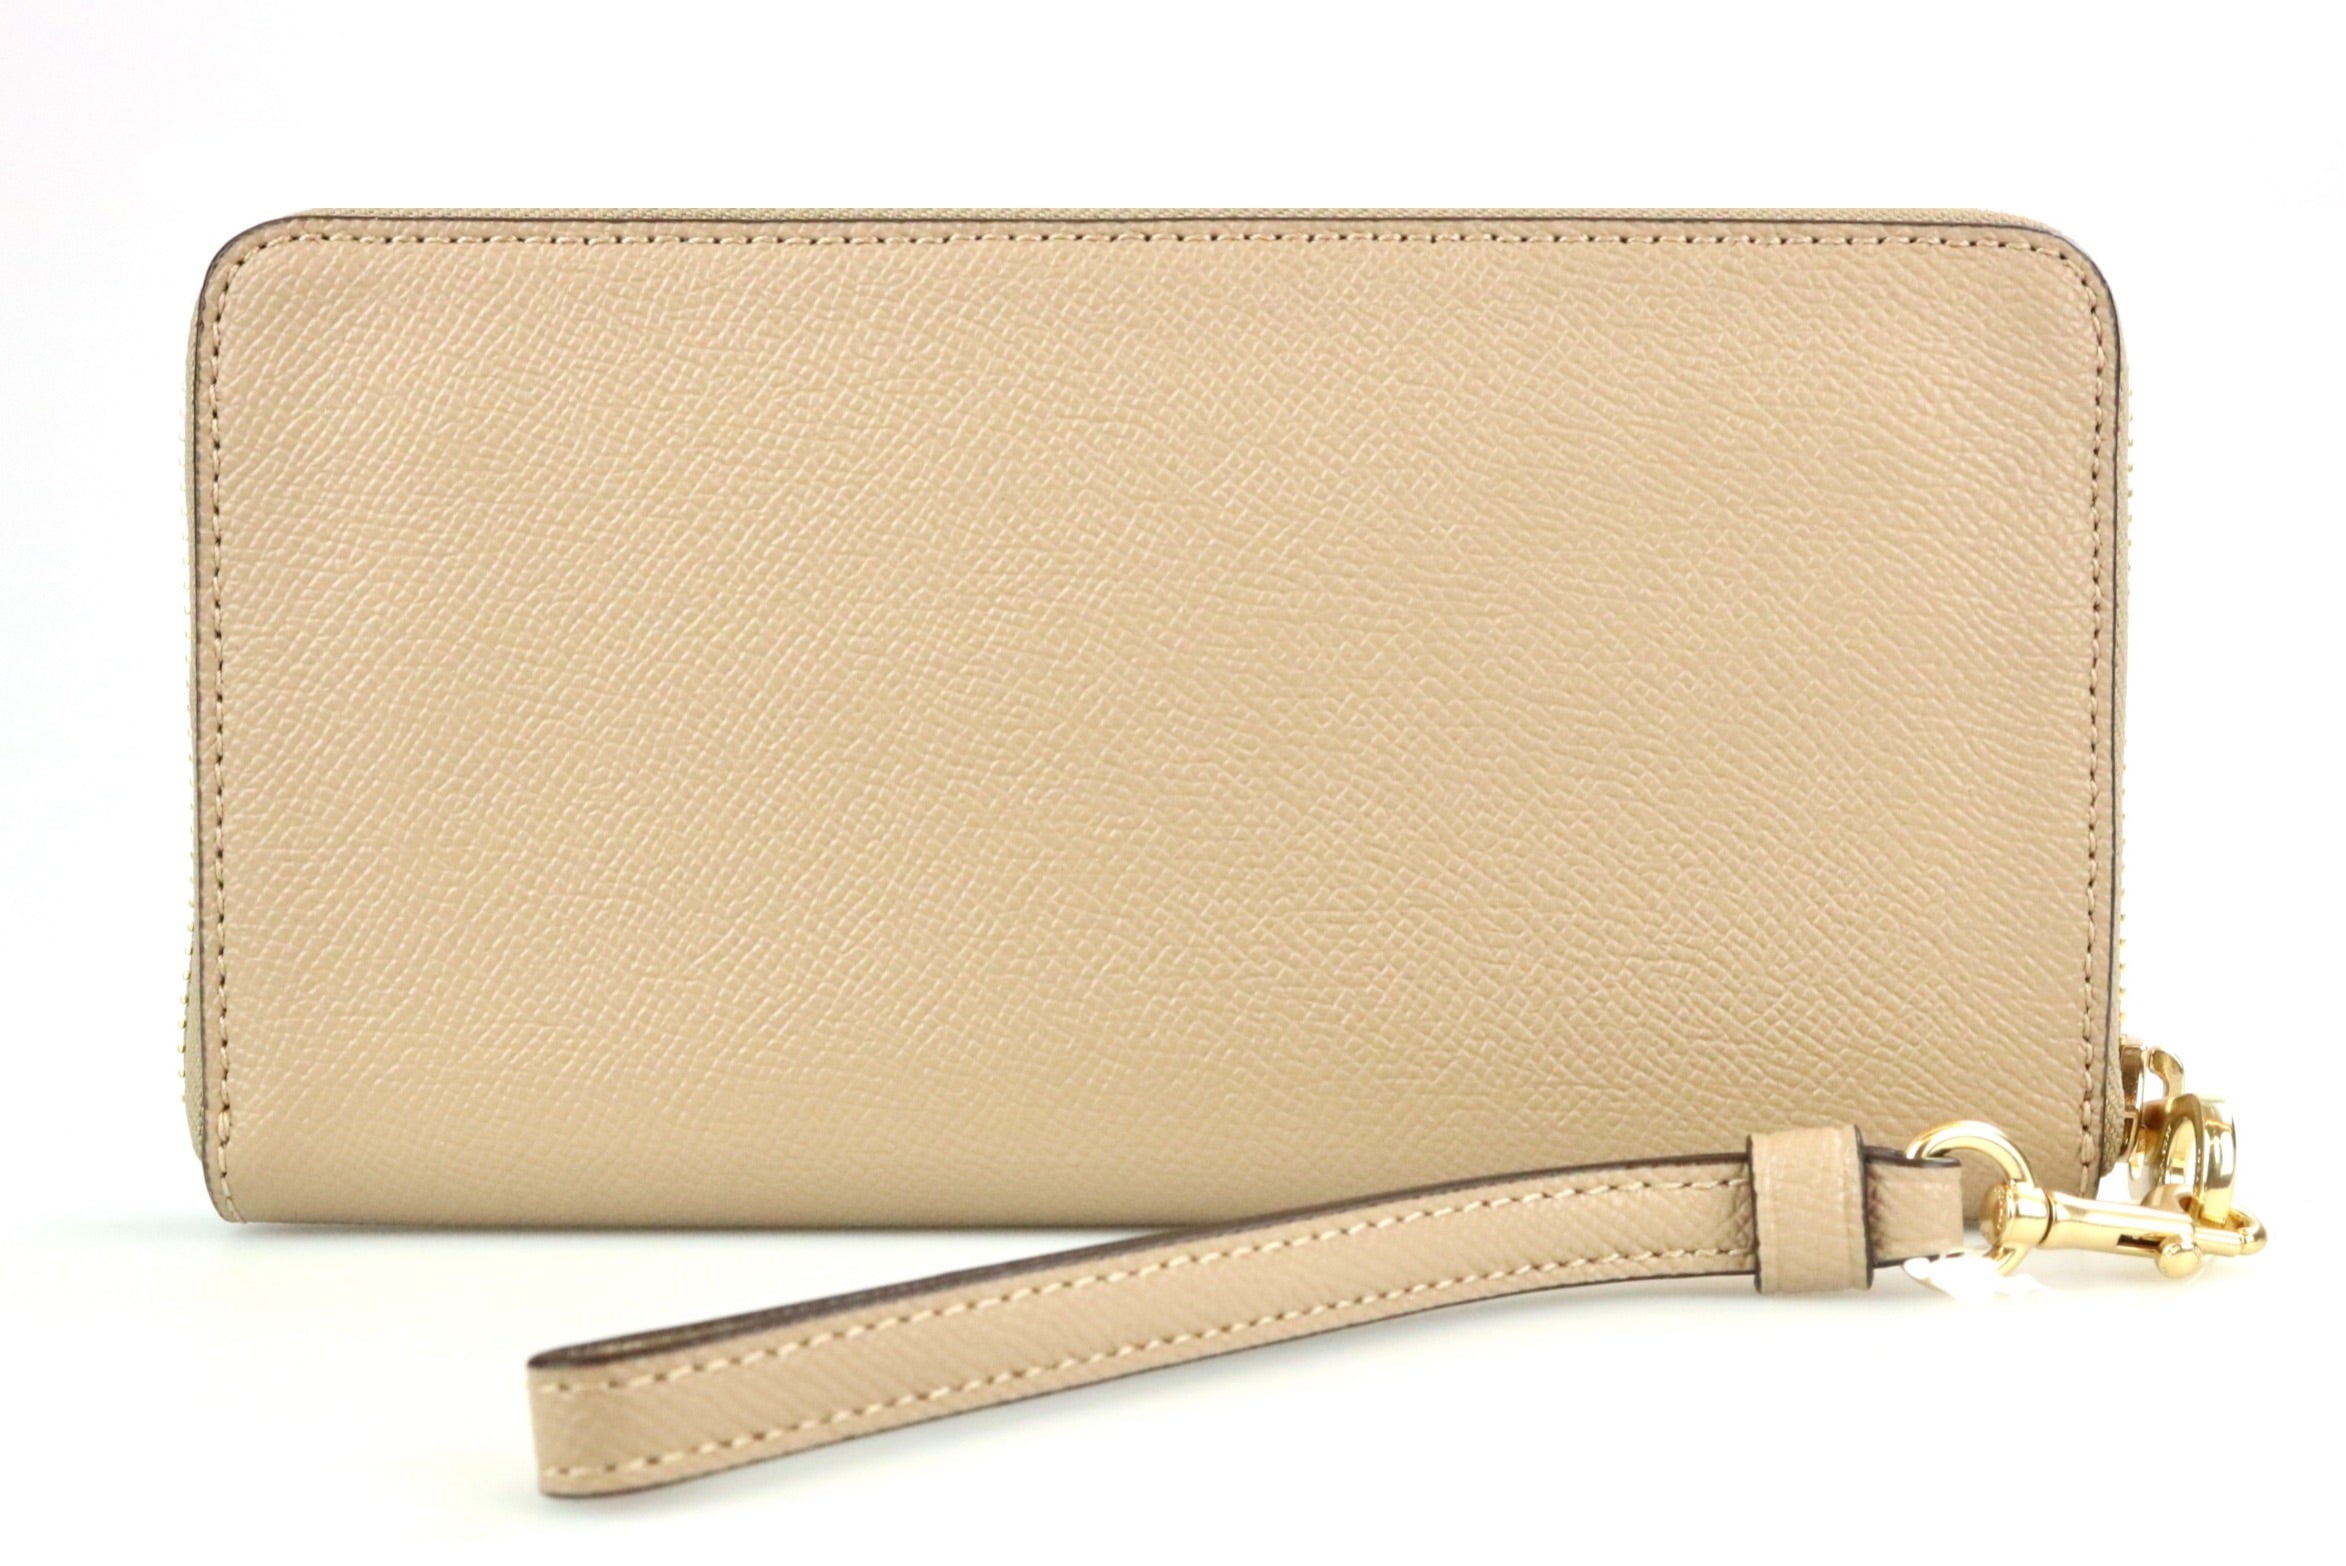 COACH®  Long Zip Around Wallet With Coach Heritage